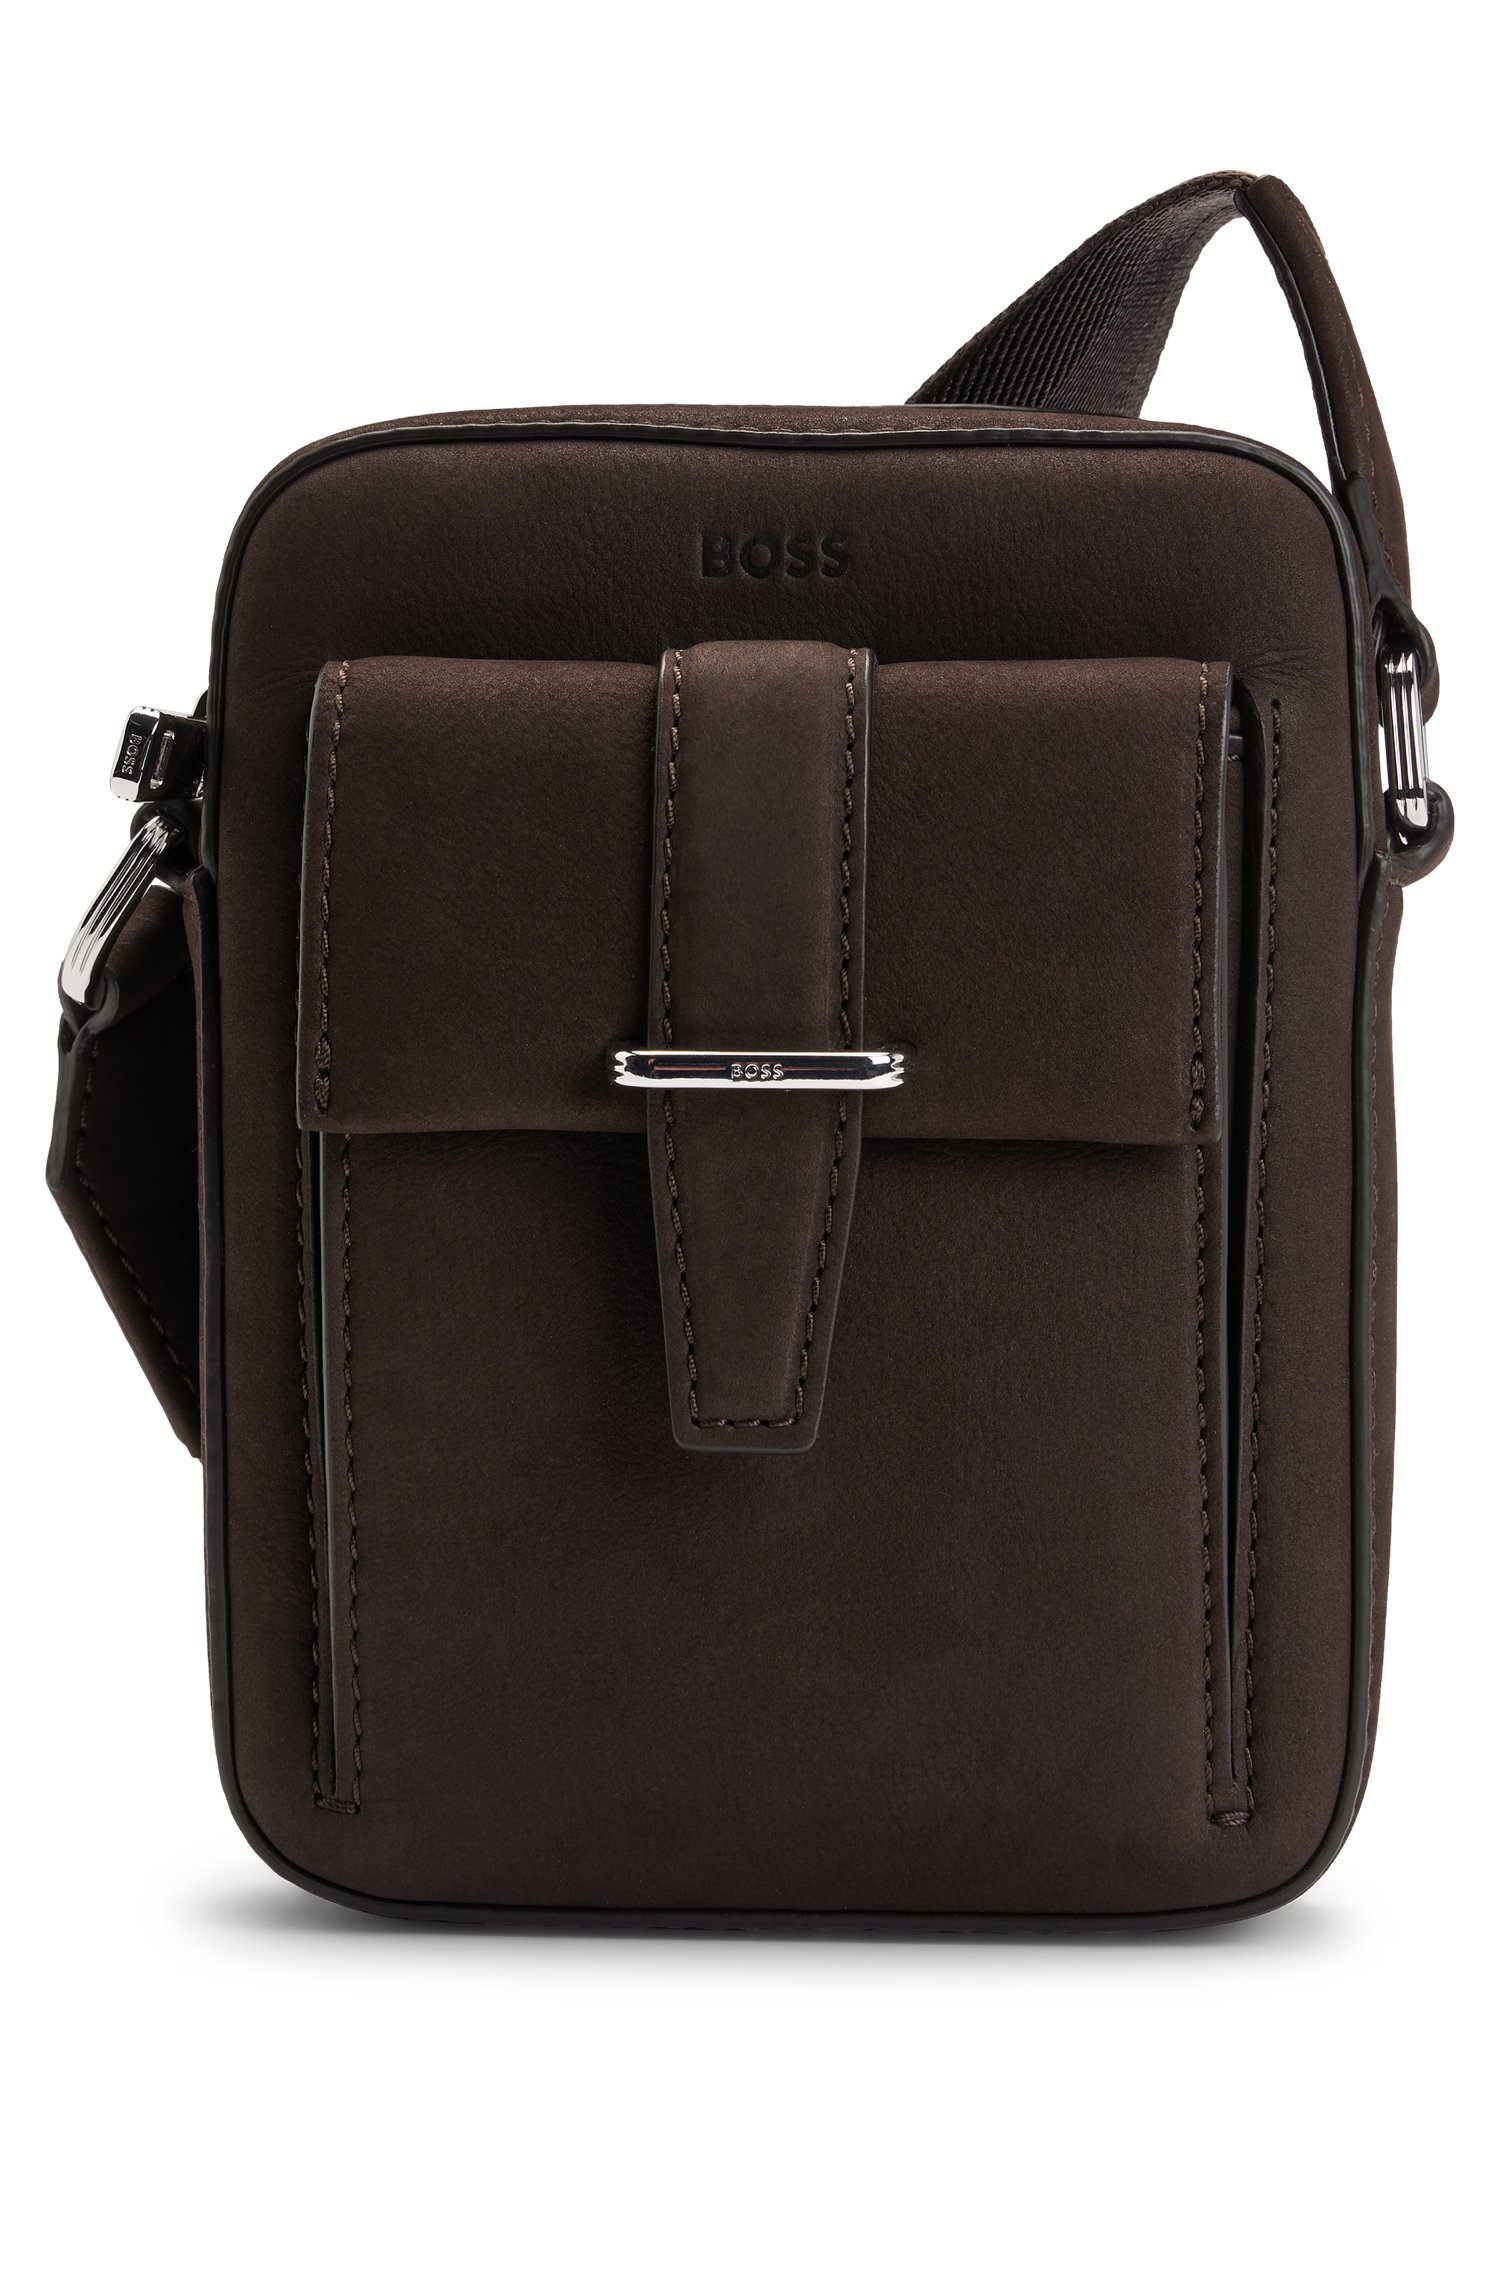 Leather reporter bag with branded trims